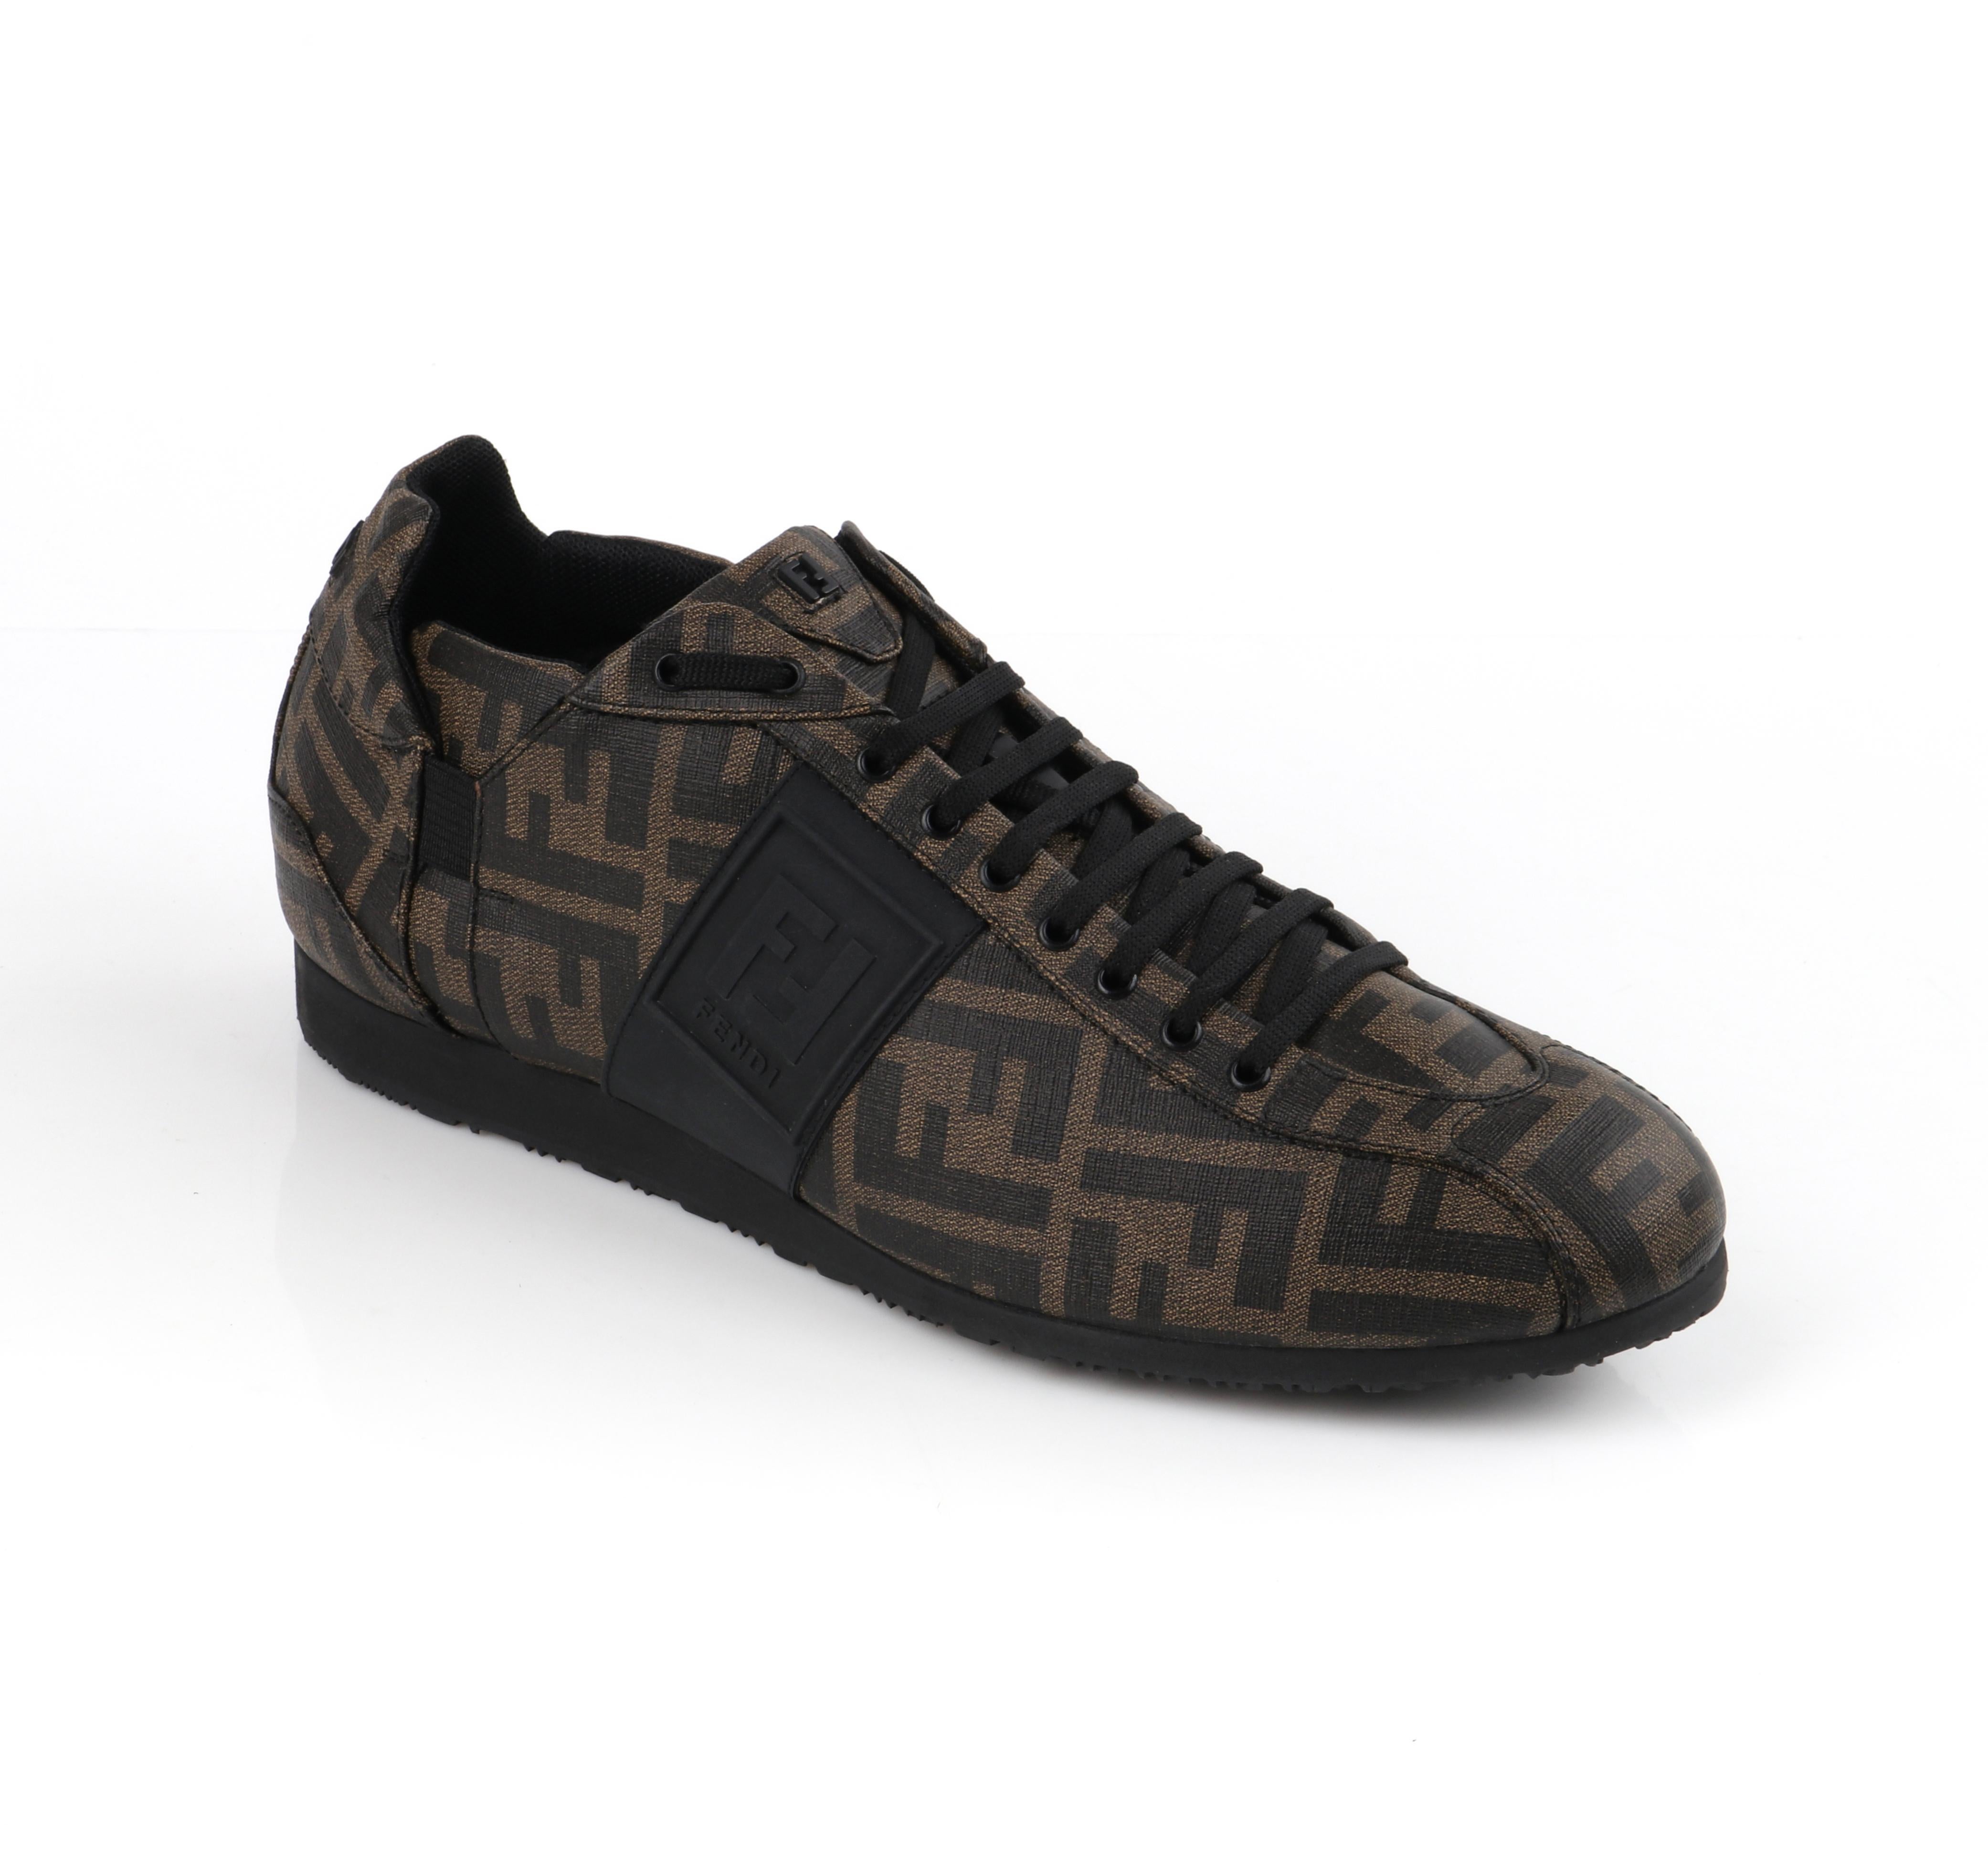 FENDI Brown Zucca Monogram Coated Canvas Logo Mens Low Top Sneaker Shoes
 
Brand / Manufacturer: Fendi
Designer: Karl Lagerfeld
Style: Low top sneakers
Color(s): Shades of brown, black (exterior, interior)
Unmarked Fabric Content: Coated canvas